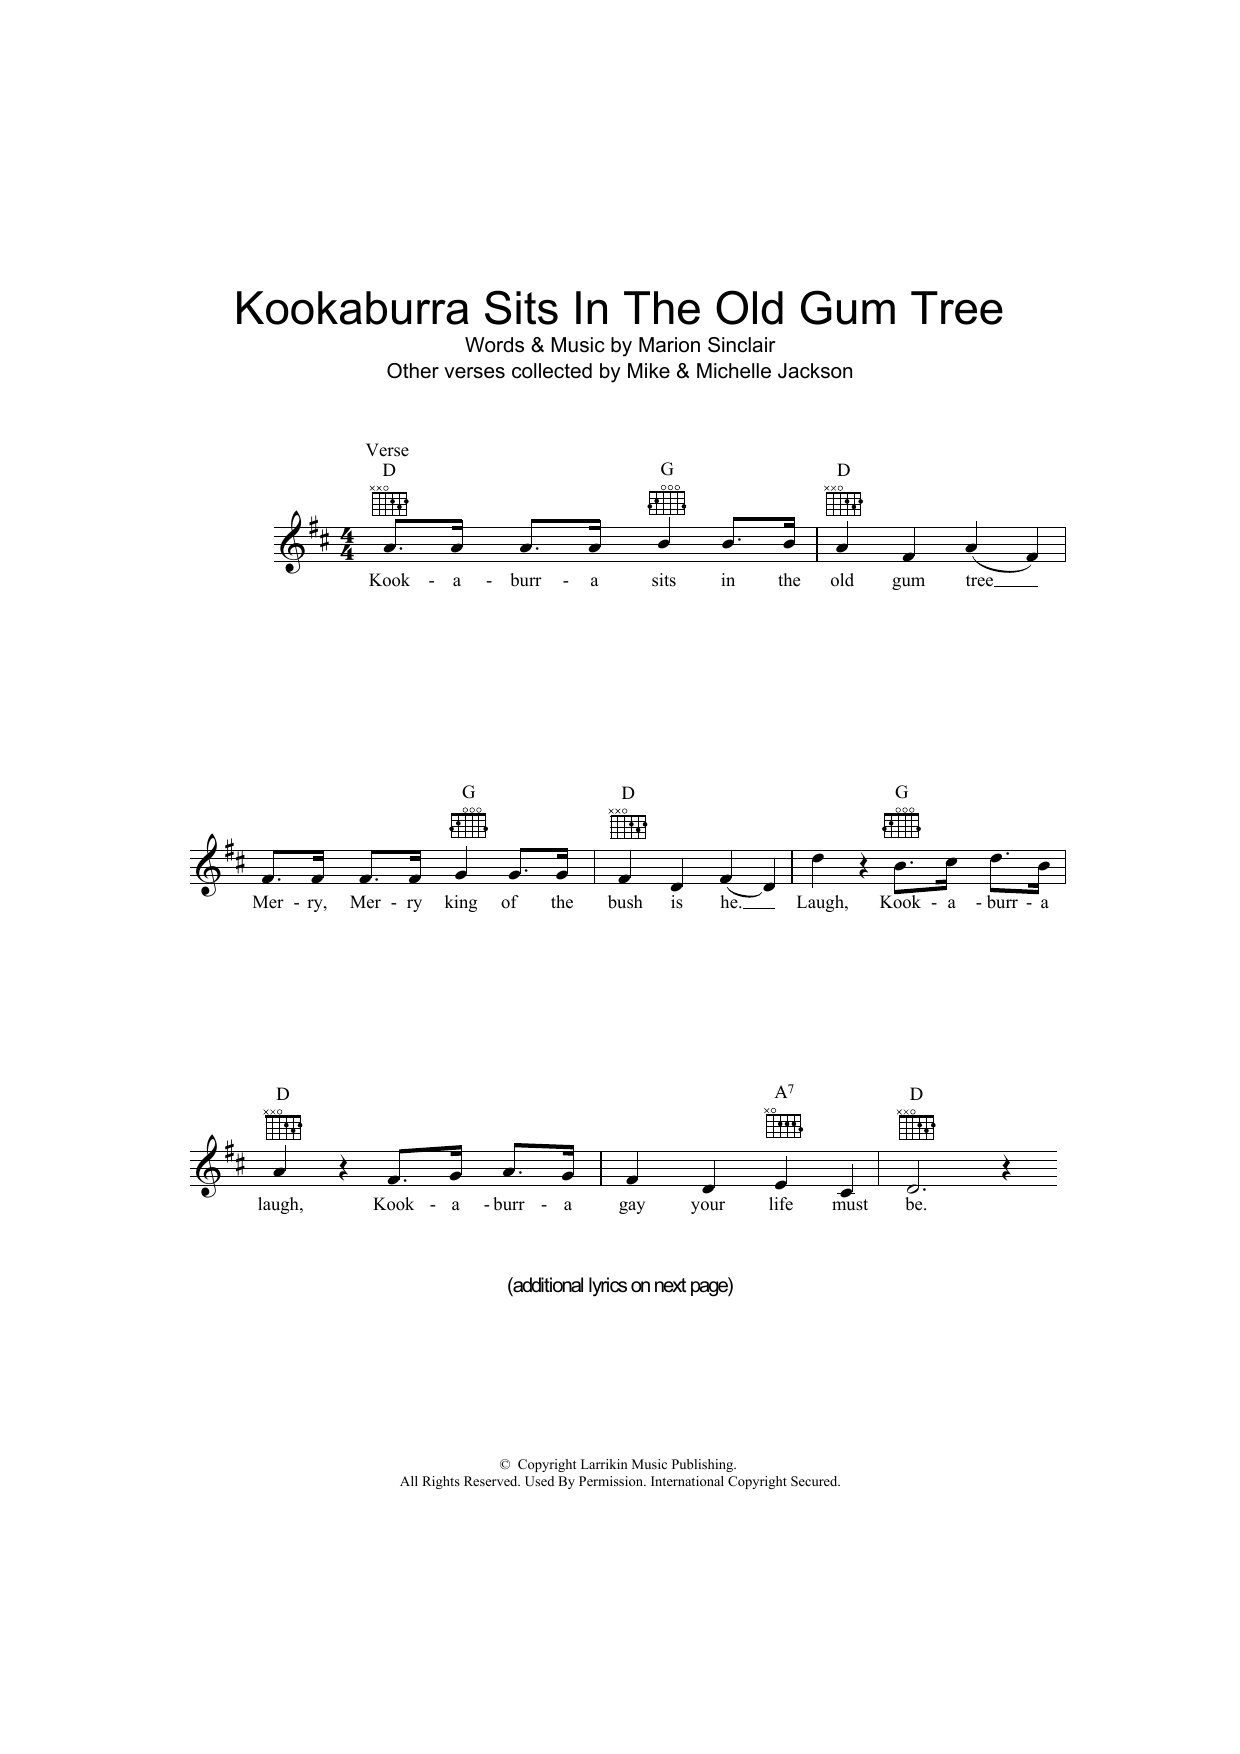 Download Marion Sinclair Kookaburra Sits In The Old Gum Tree Sheet Music